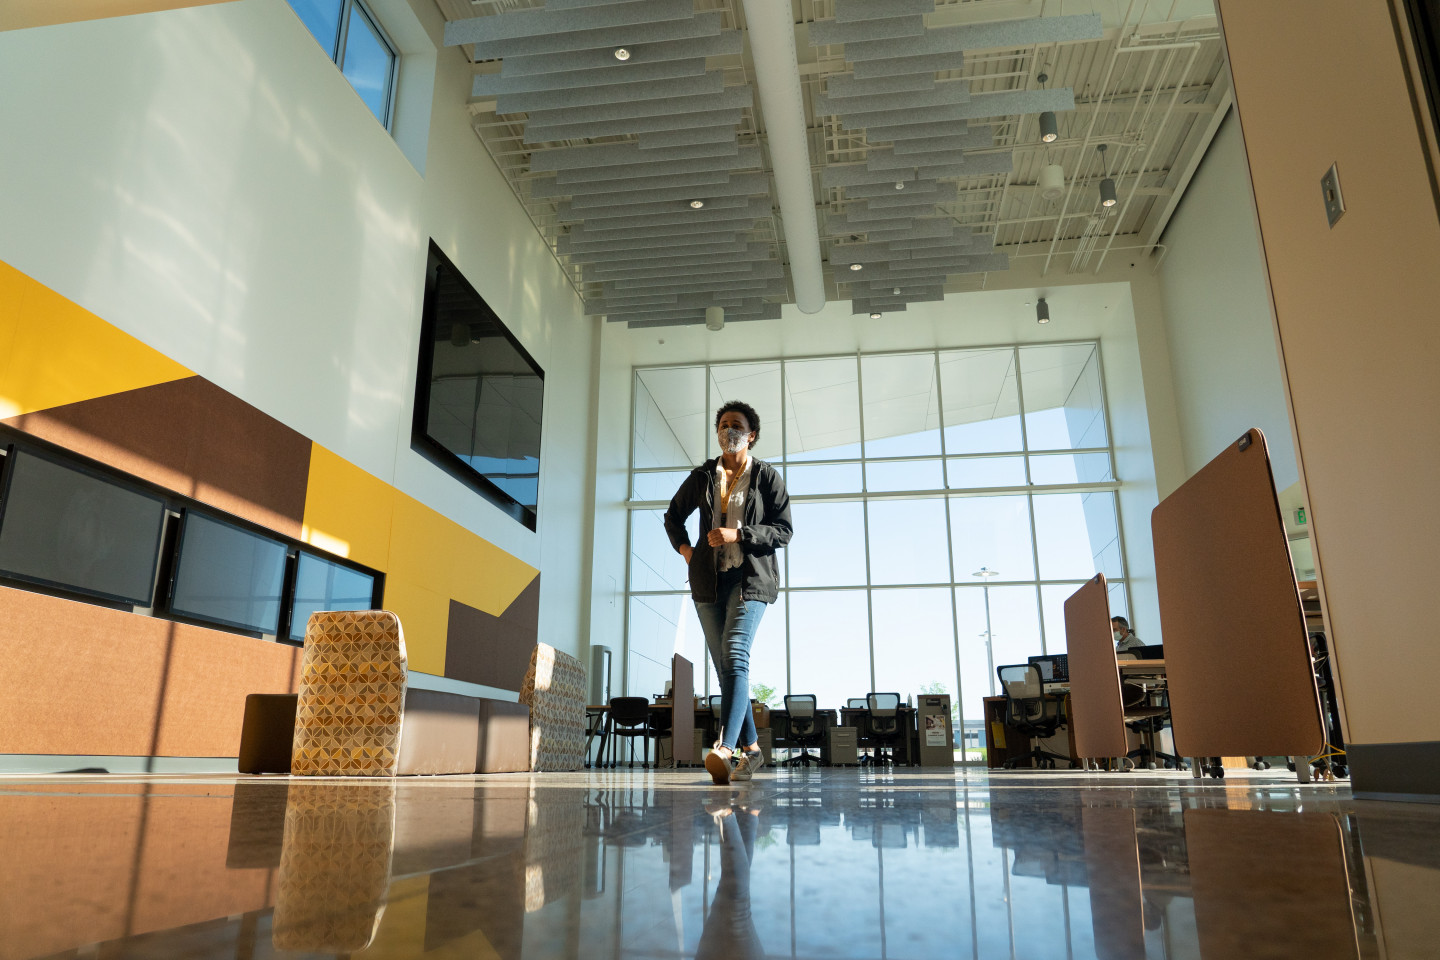 A student walks through the main entrance of the Aviation Education Center.